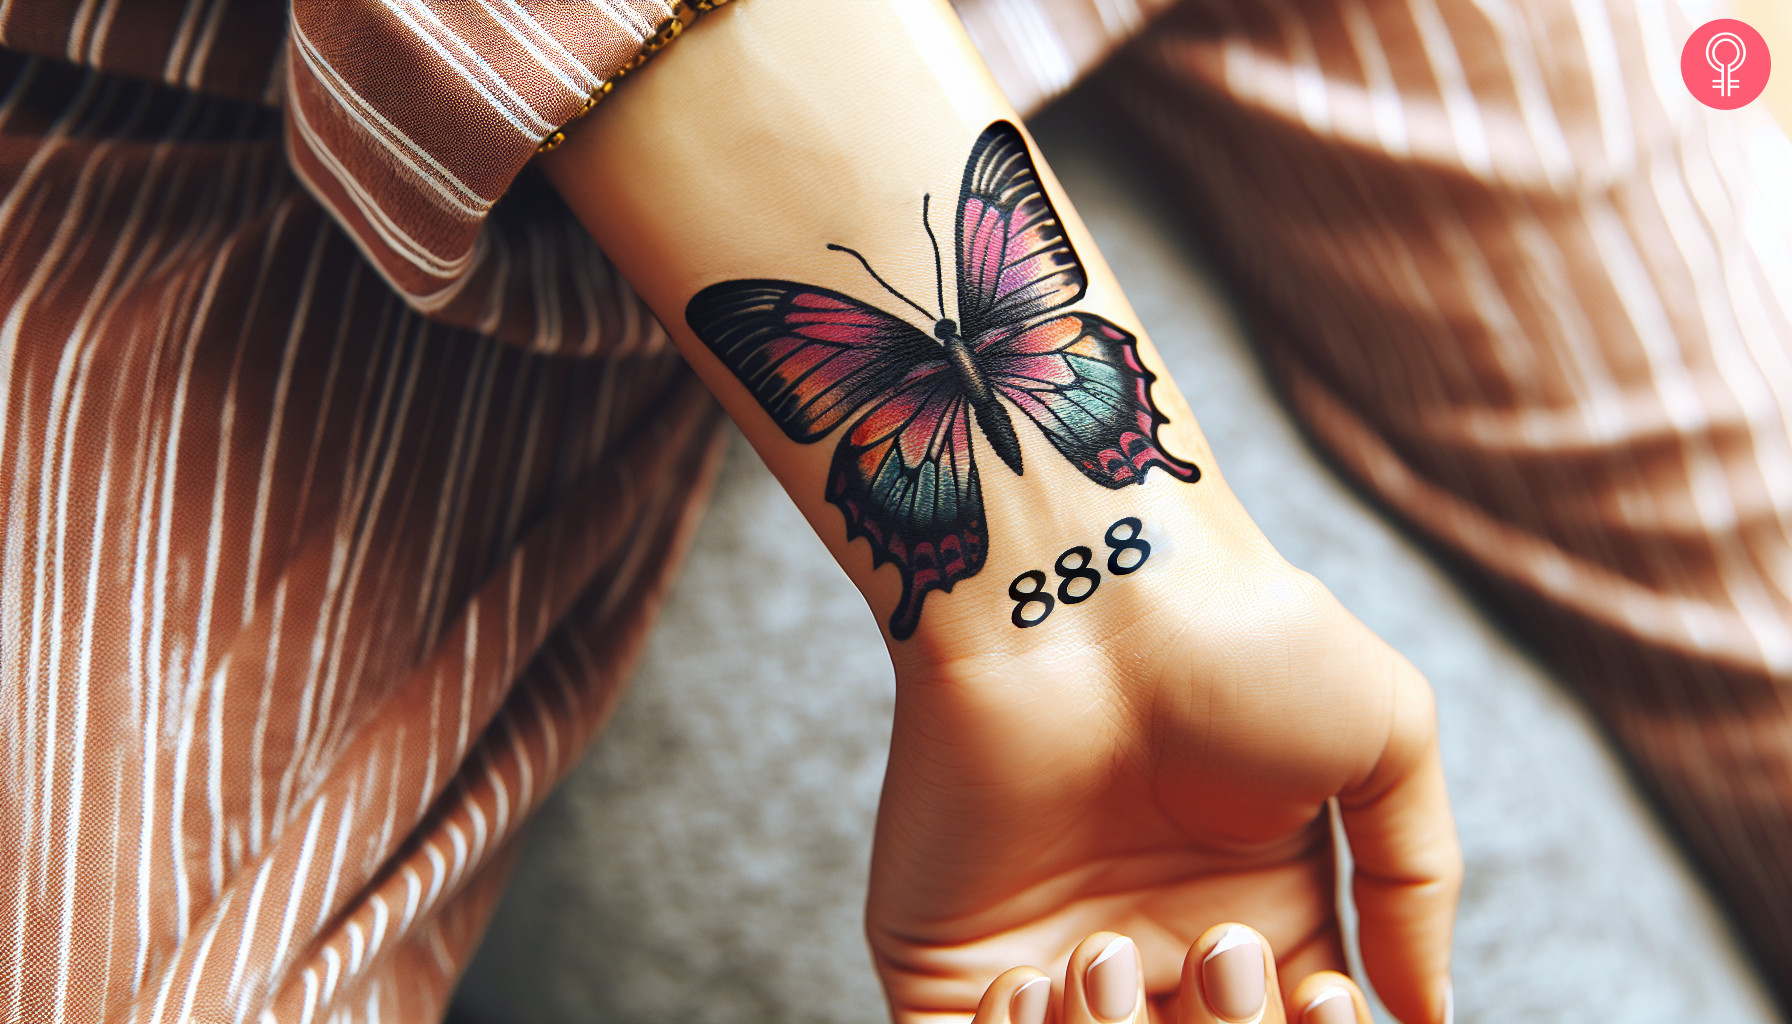 Butterfly angel number tattoo on the wrist of a woman